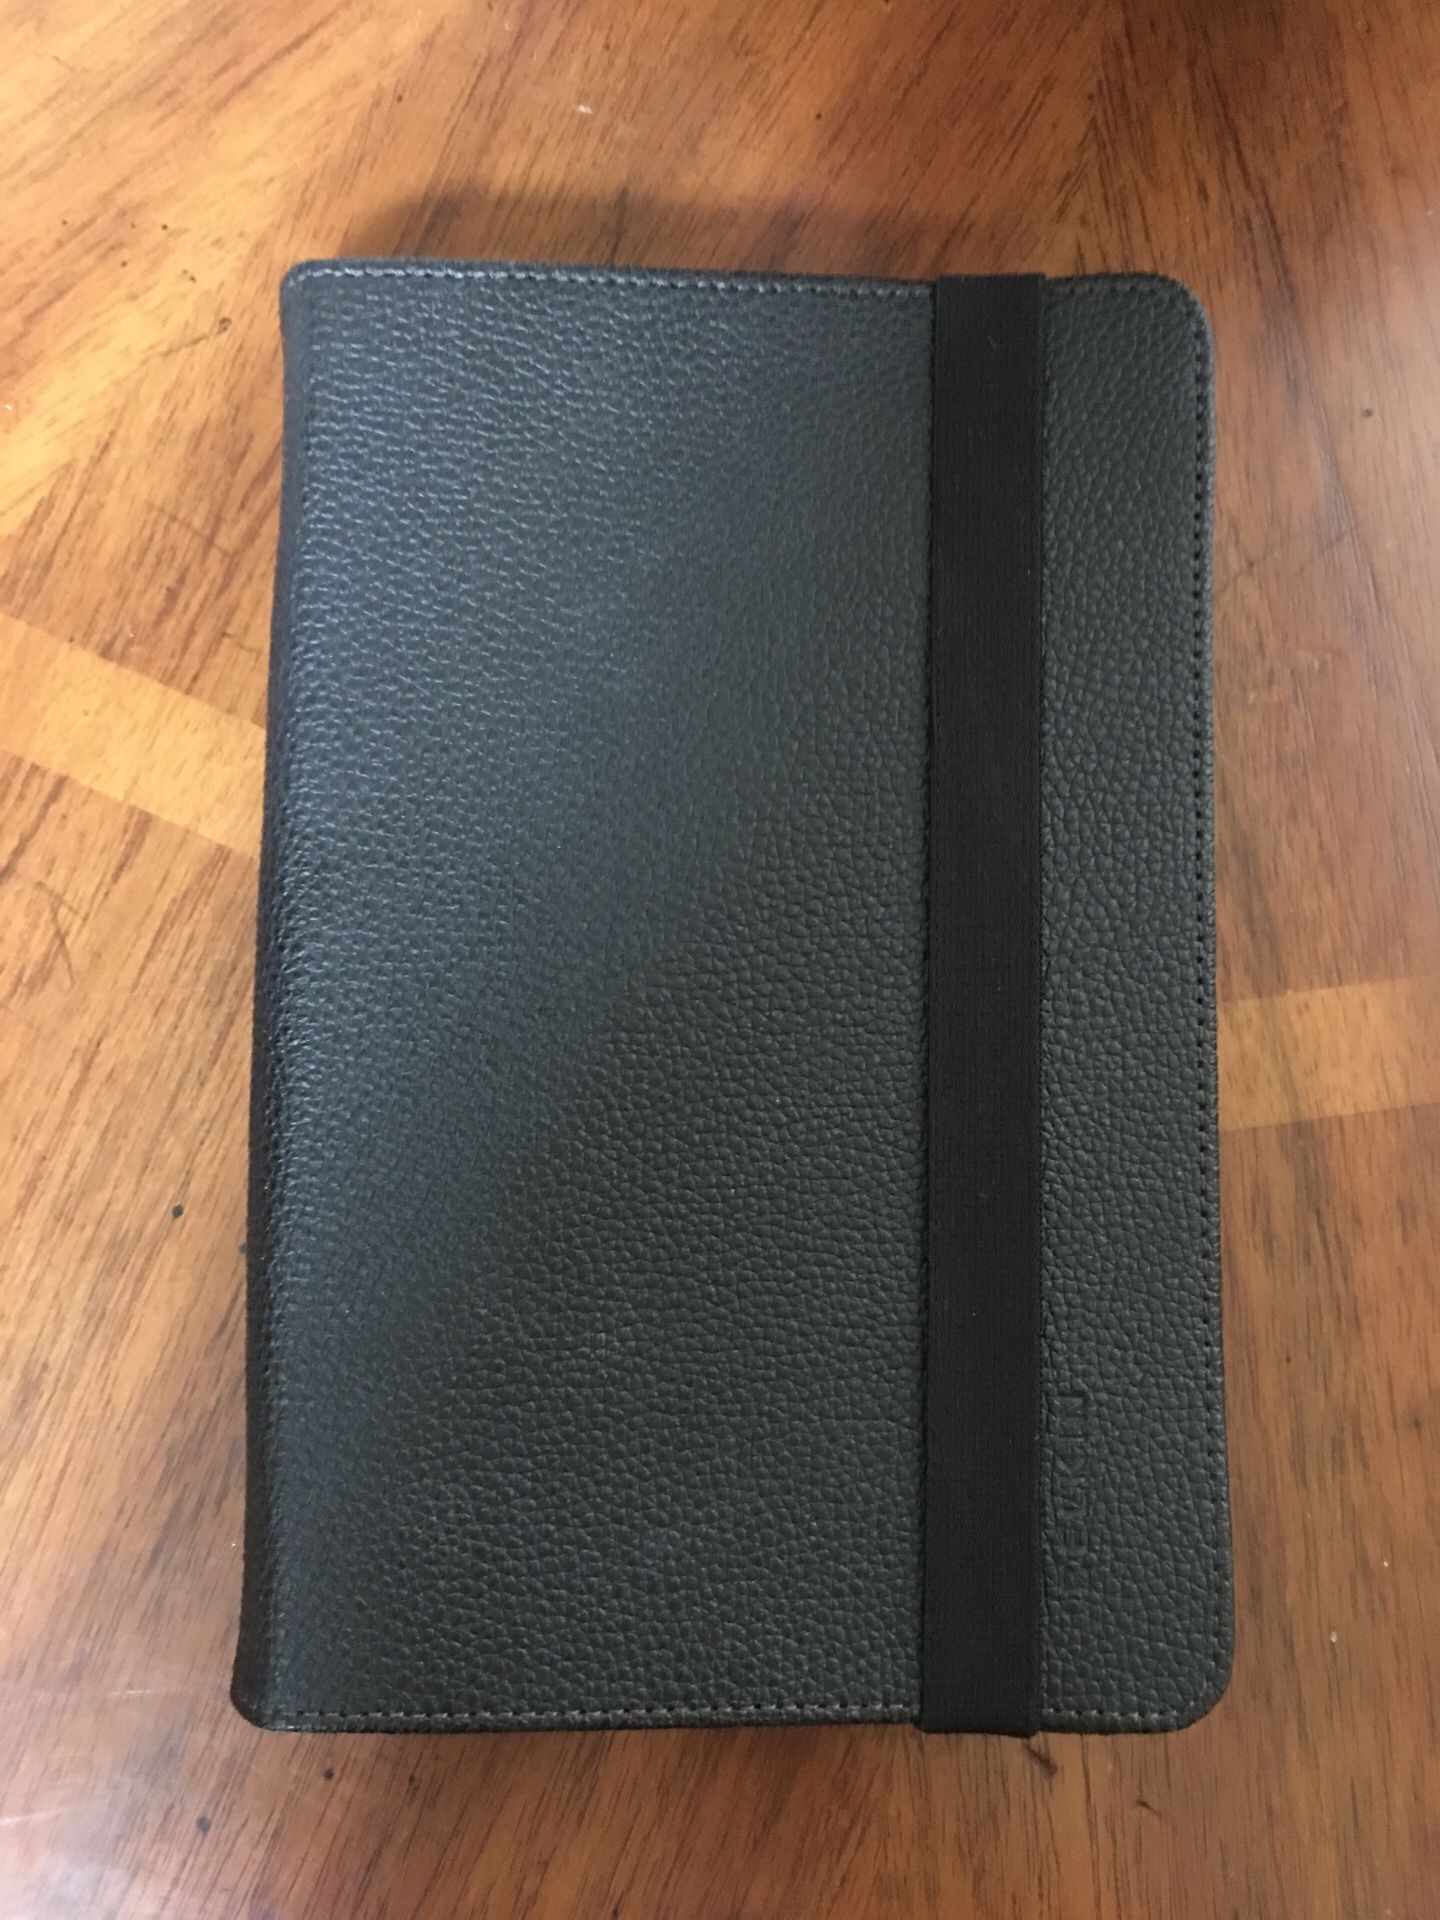 Kindle Fire 7 and Leather Case - Like New